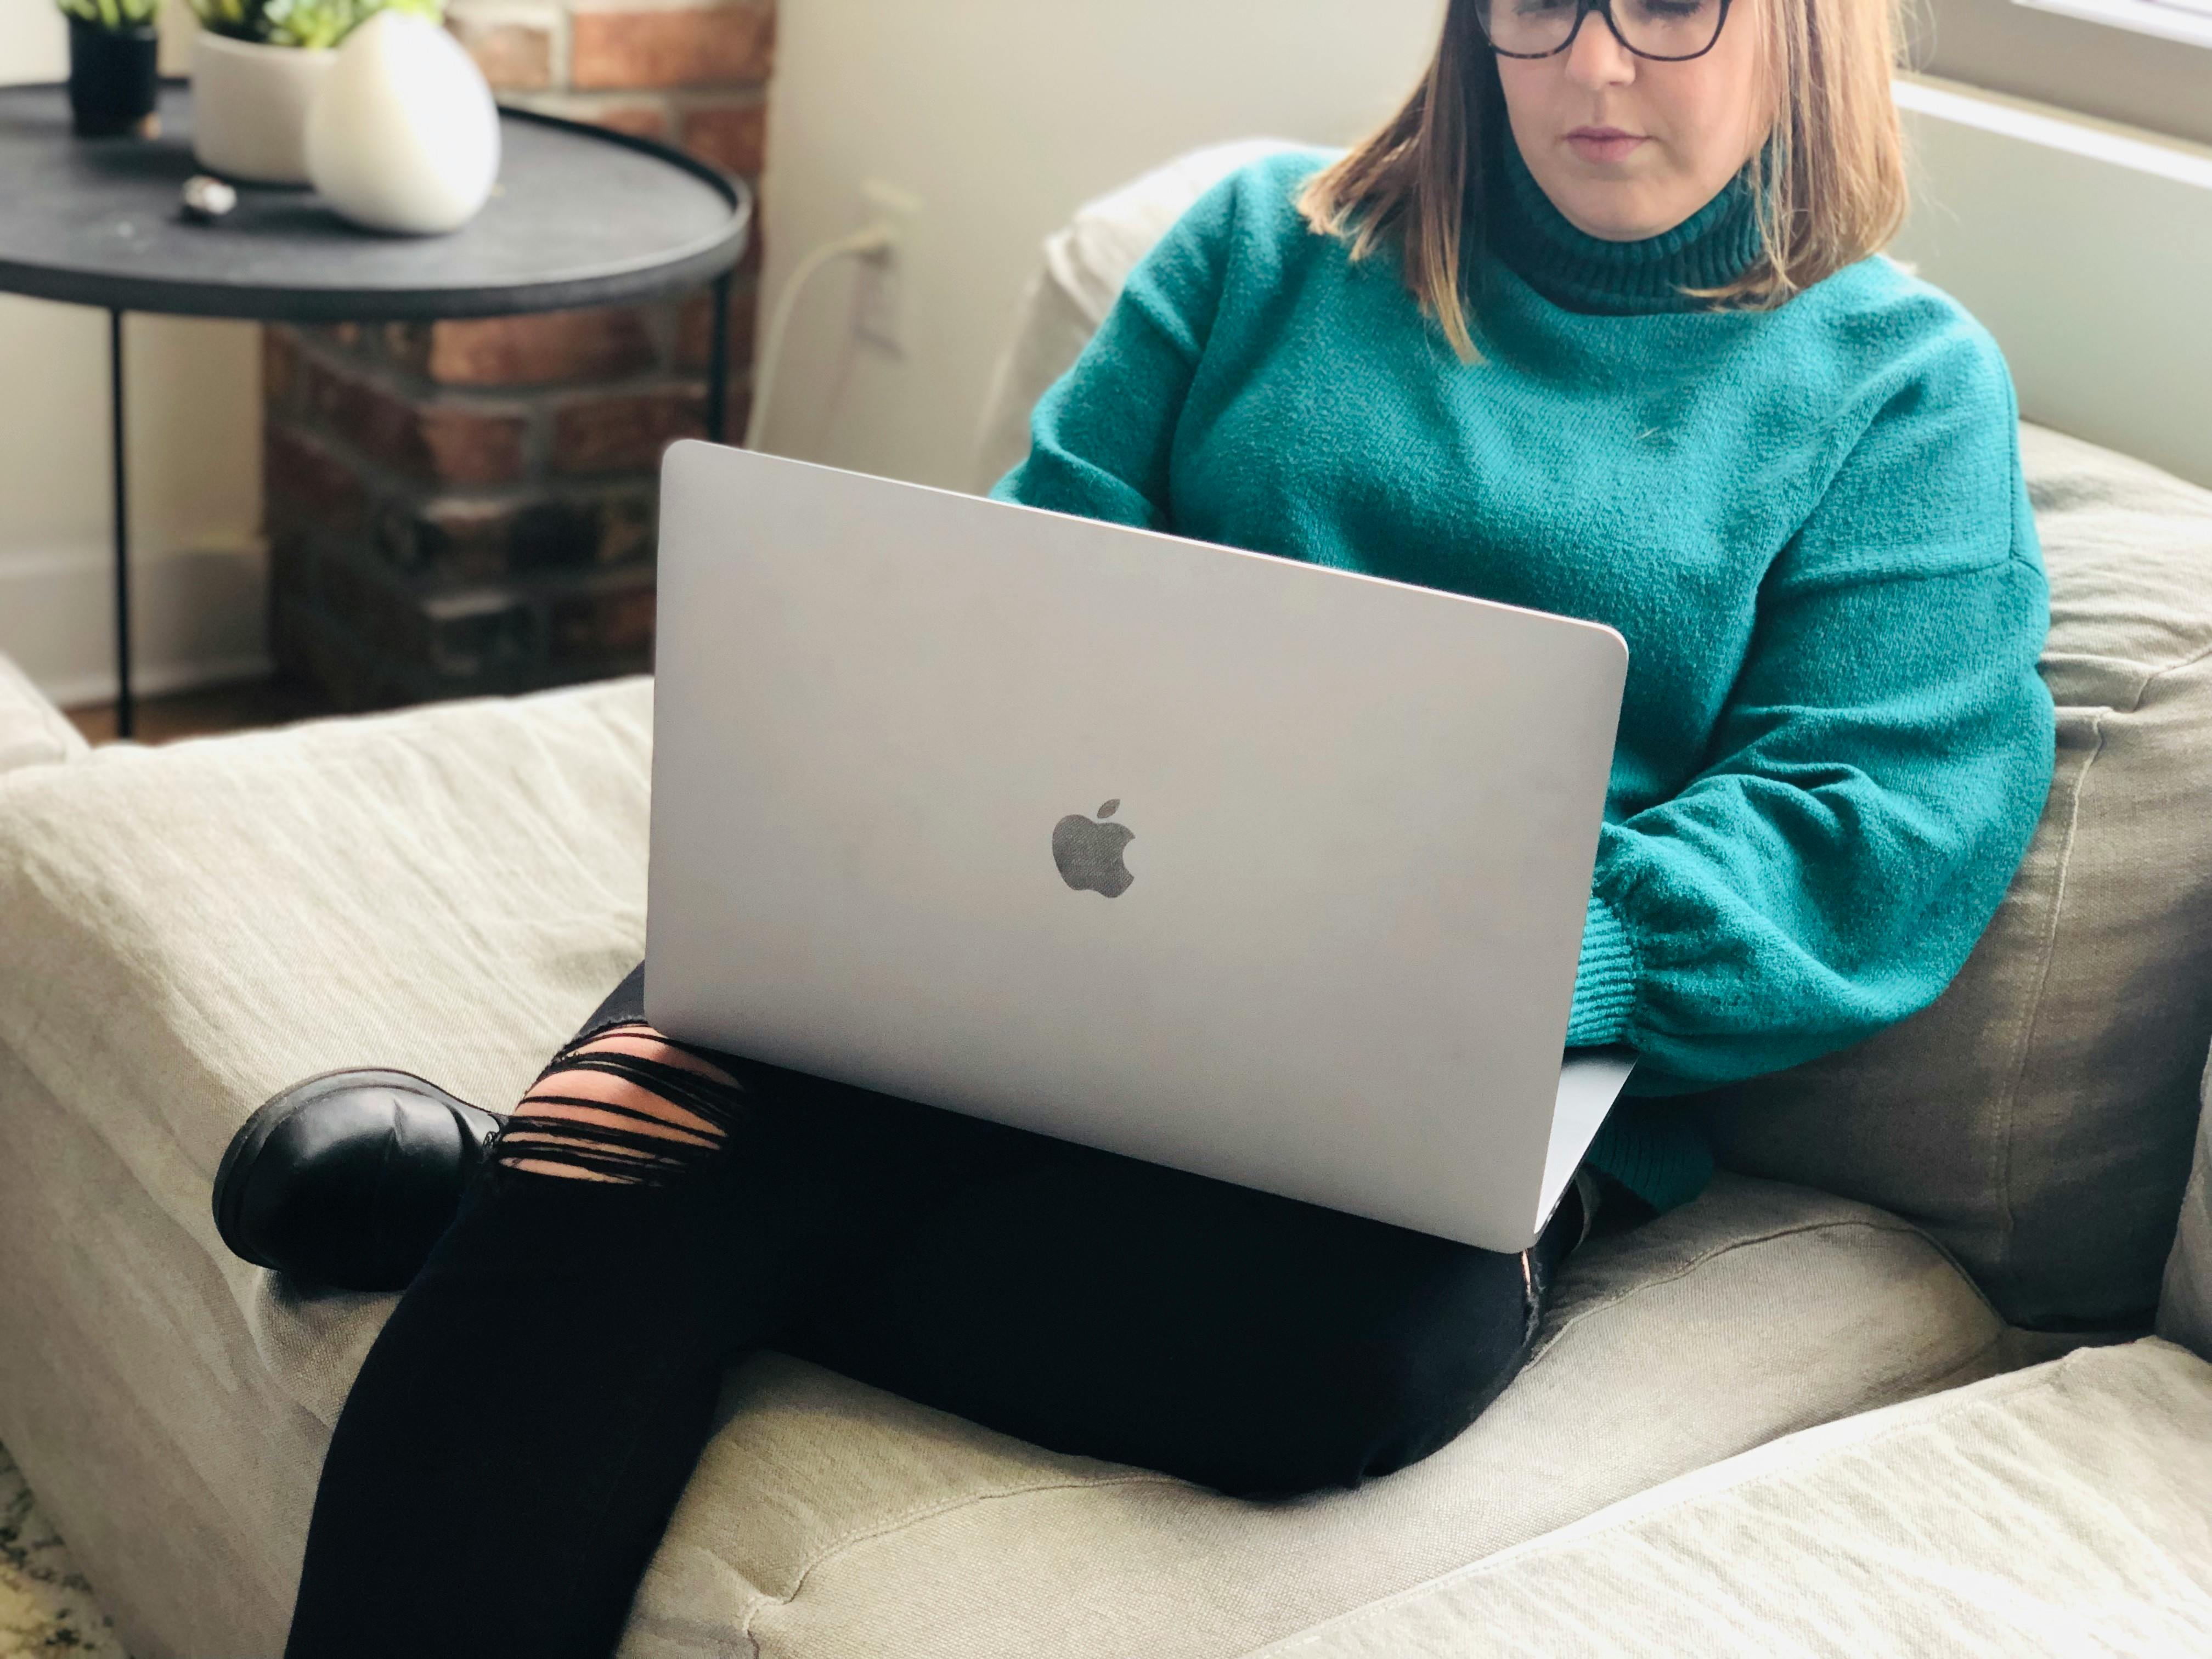 A woman sitting on a couch, working on a macbook computer. 